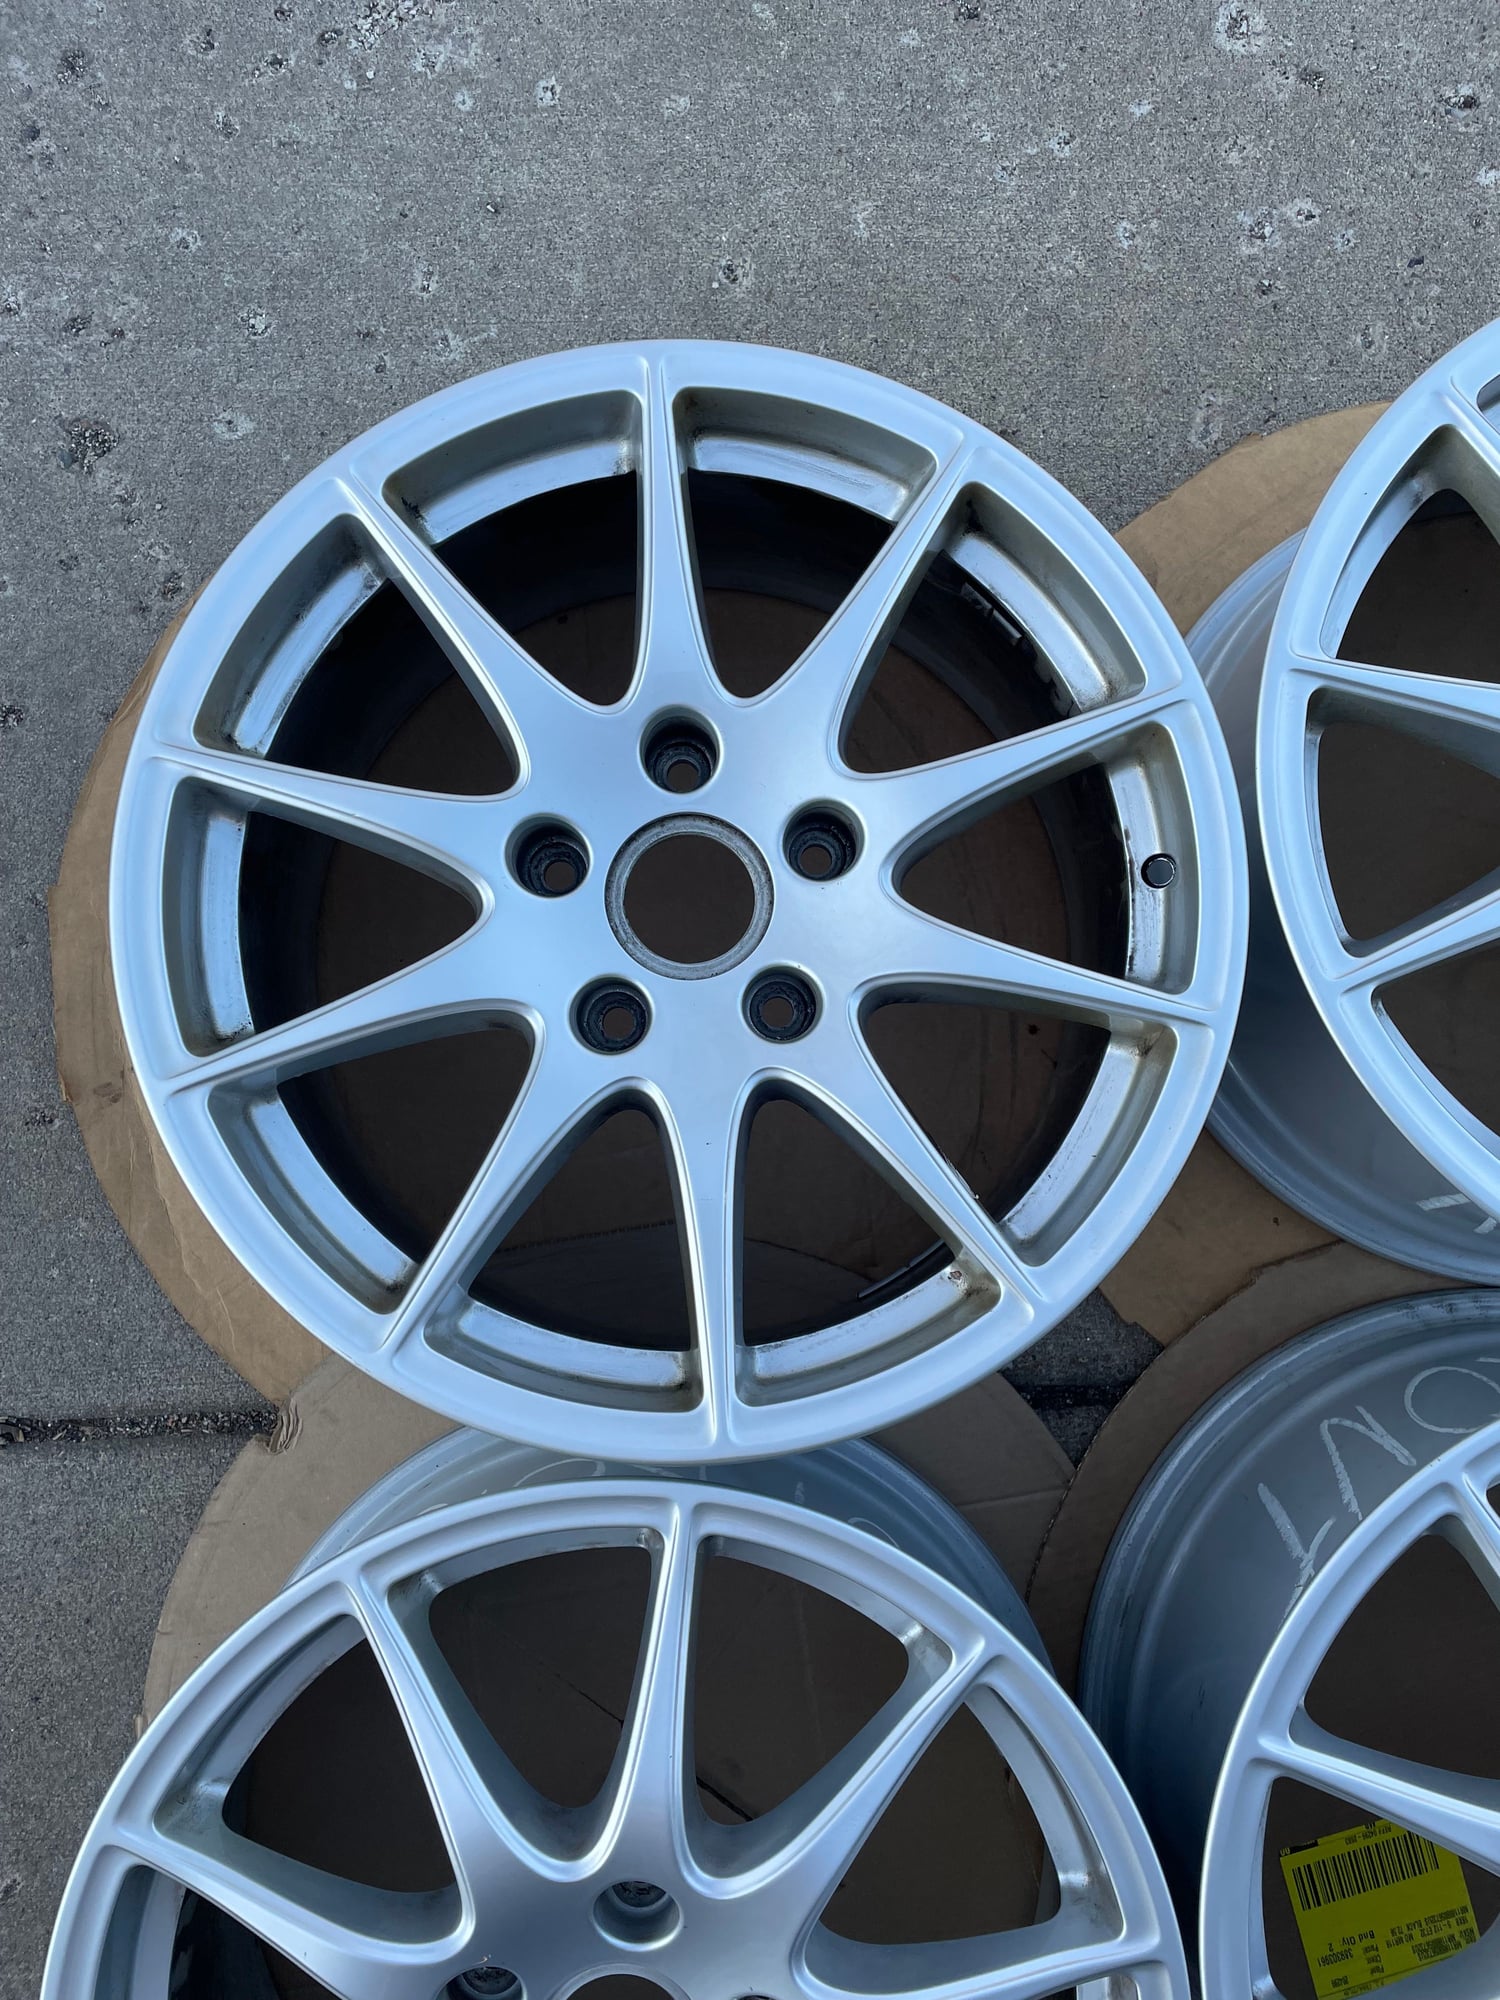 2020 Porsche Cayenne - 18" OEM Porsche Panamera S Wheels - 970 970.1 - Silver - Wheels and Tires/Axles - $750 - Plymouth, MN 55447, United States